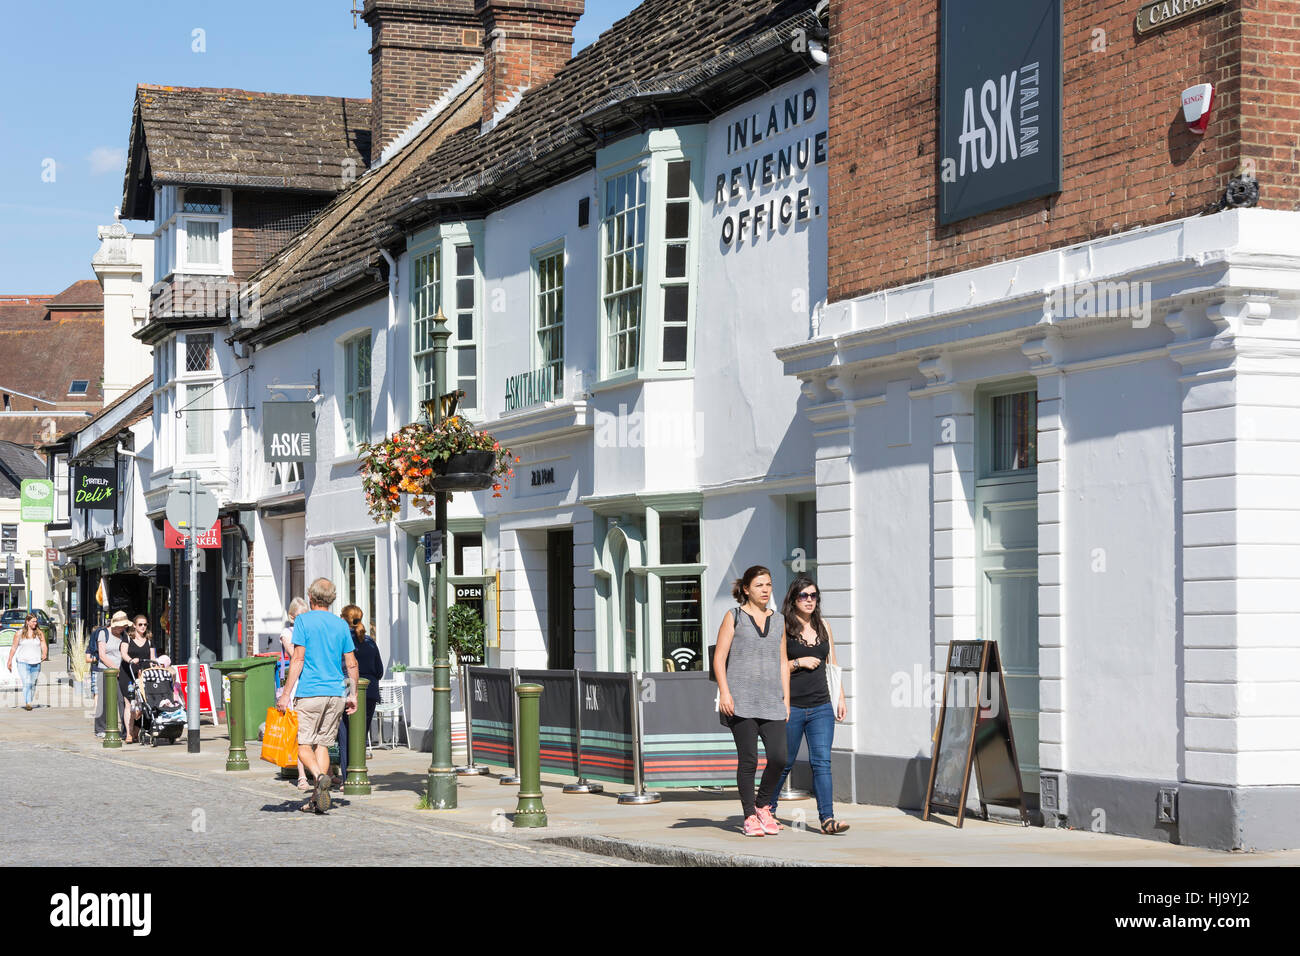 Ask Restaurant in former 15th century Olde Kings Head Hotel, Carfax, Horsham, West Sussex, England, United Kingdom Stock Photo